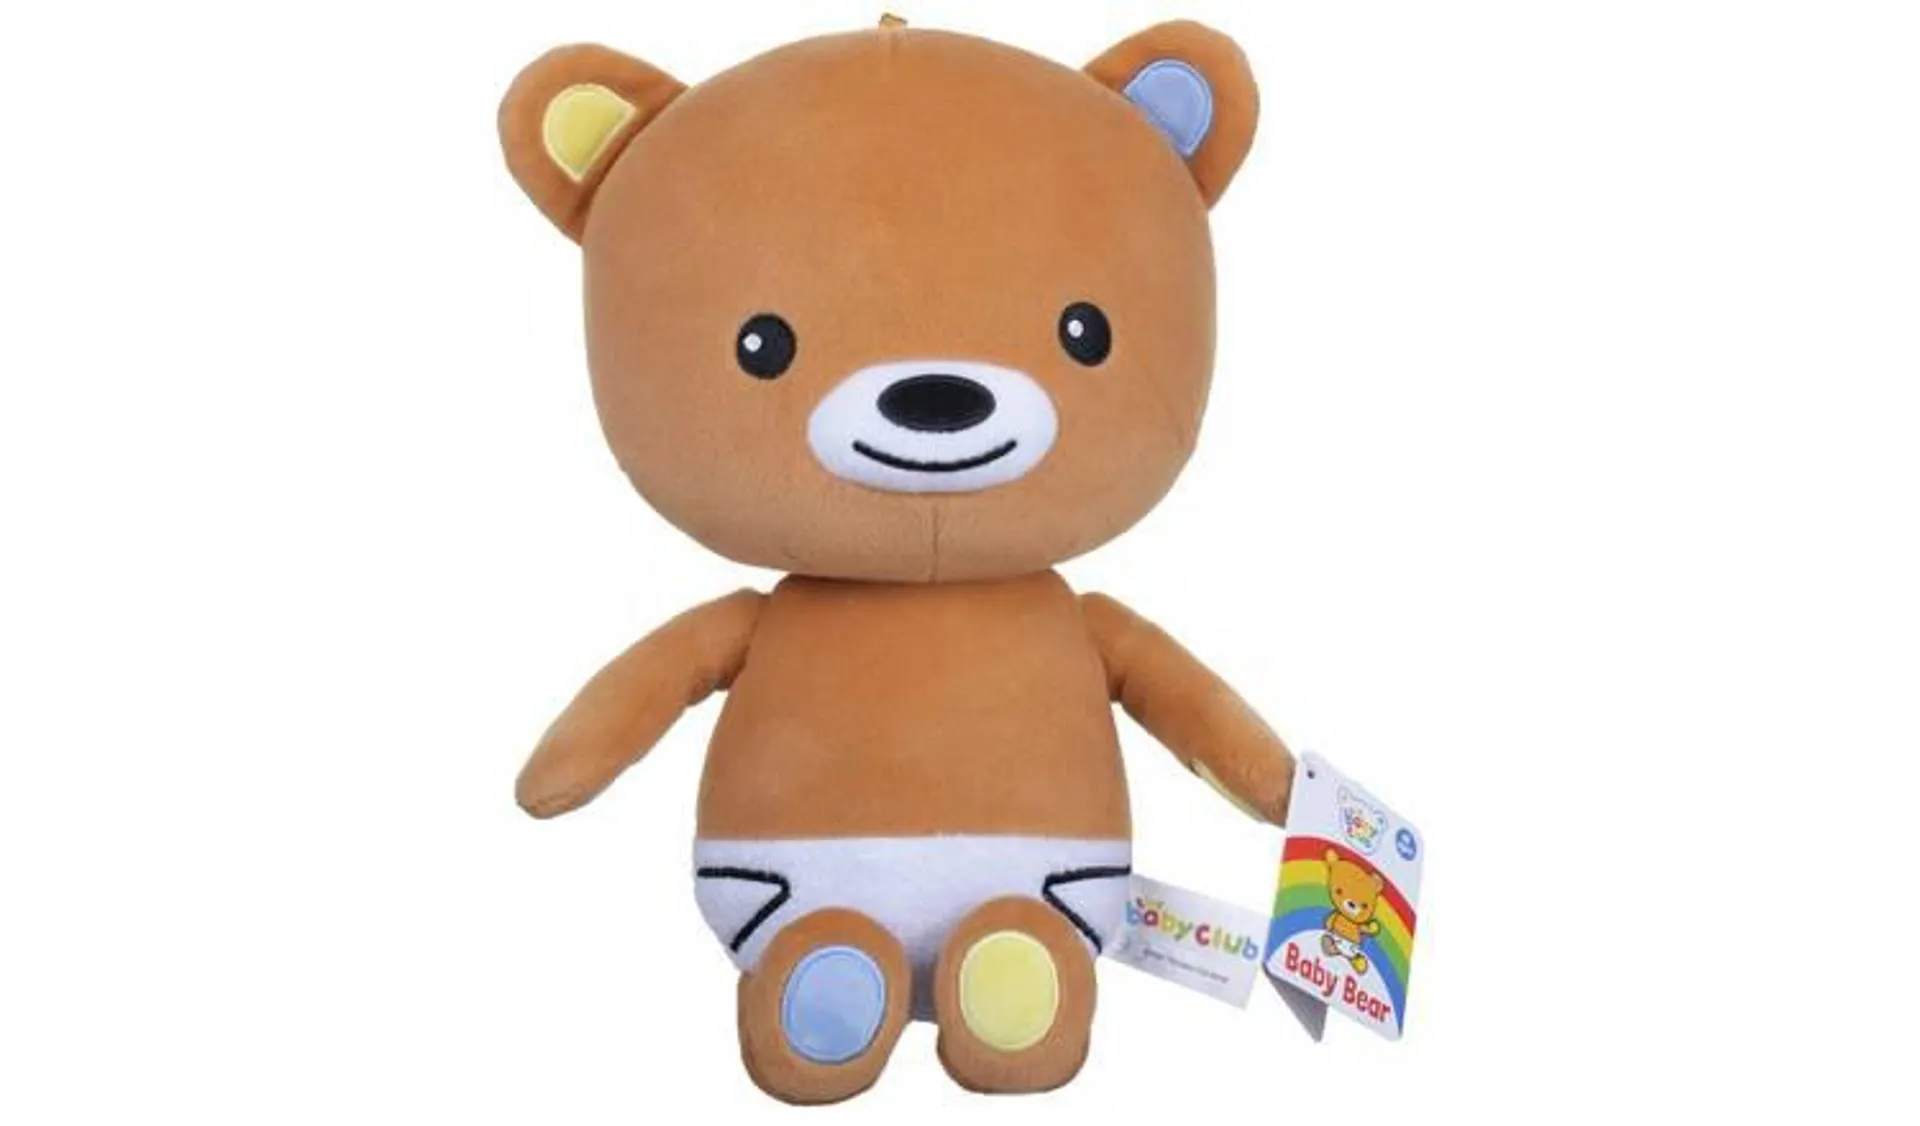 The Baby Club Baby Bear Soft Toy